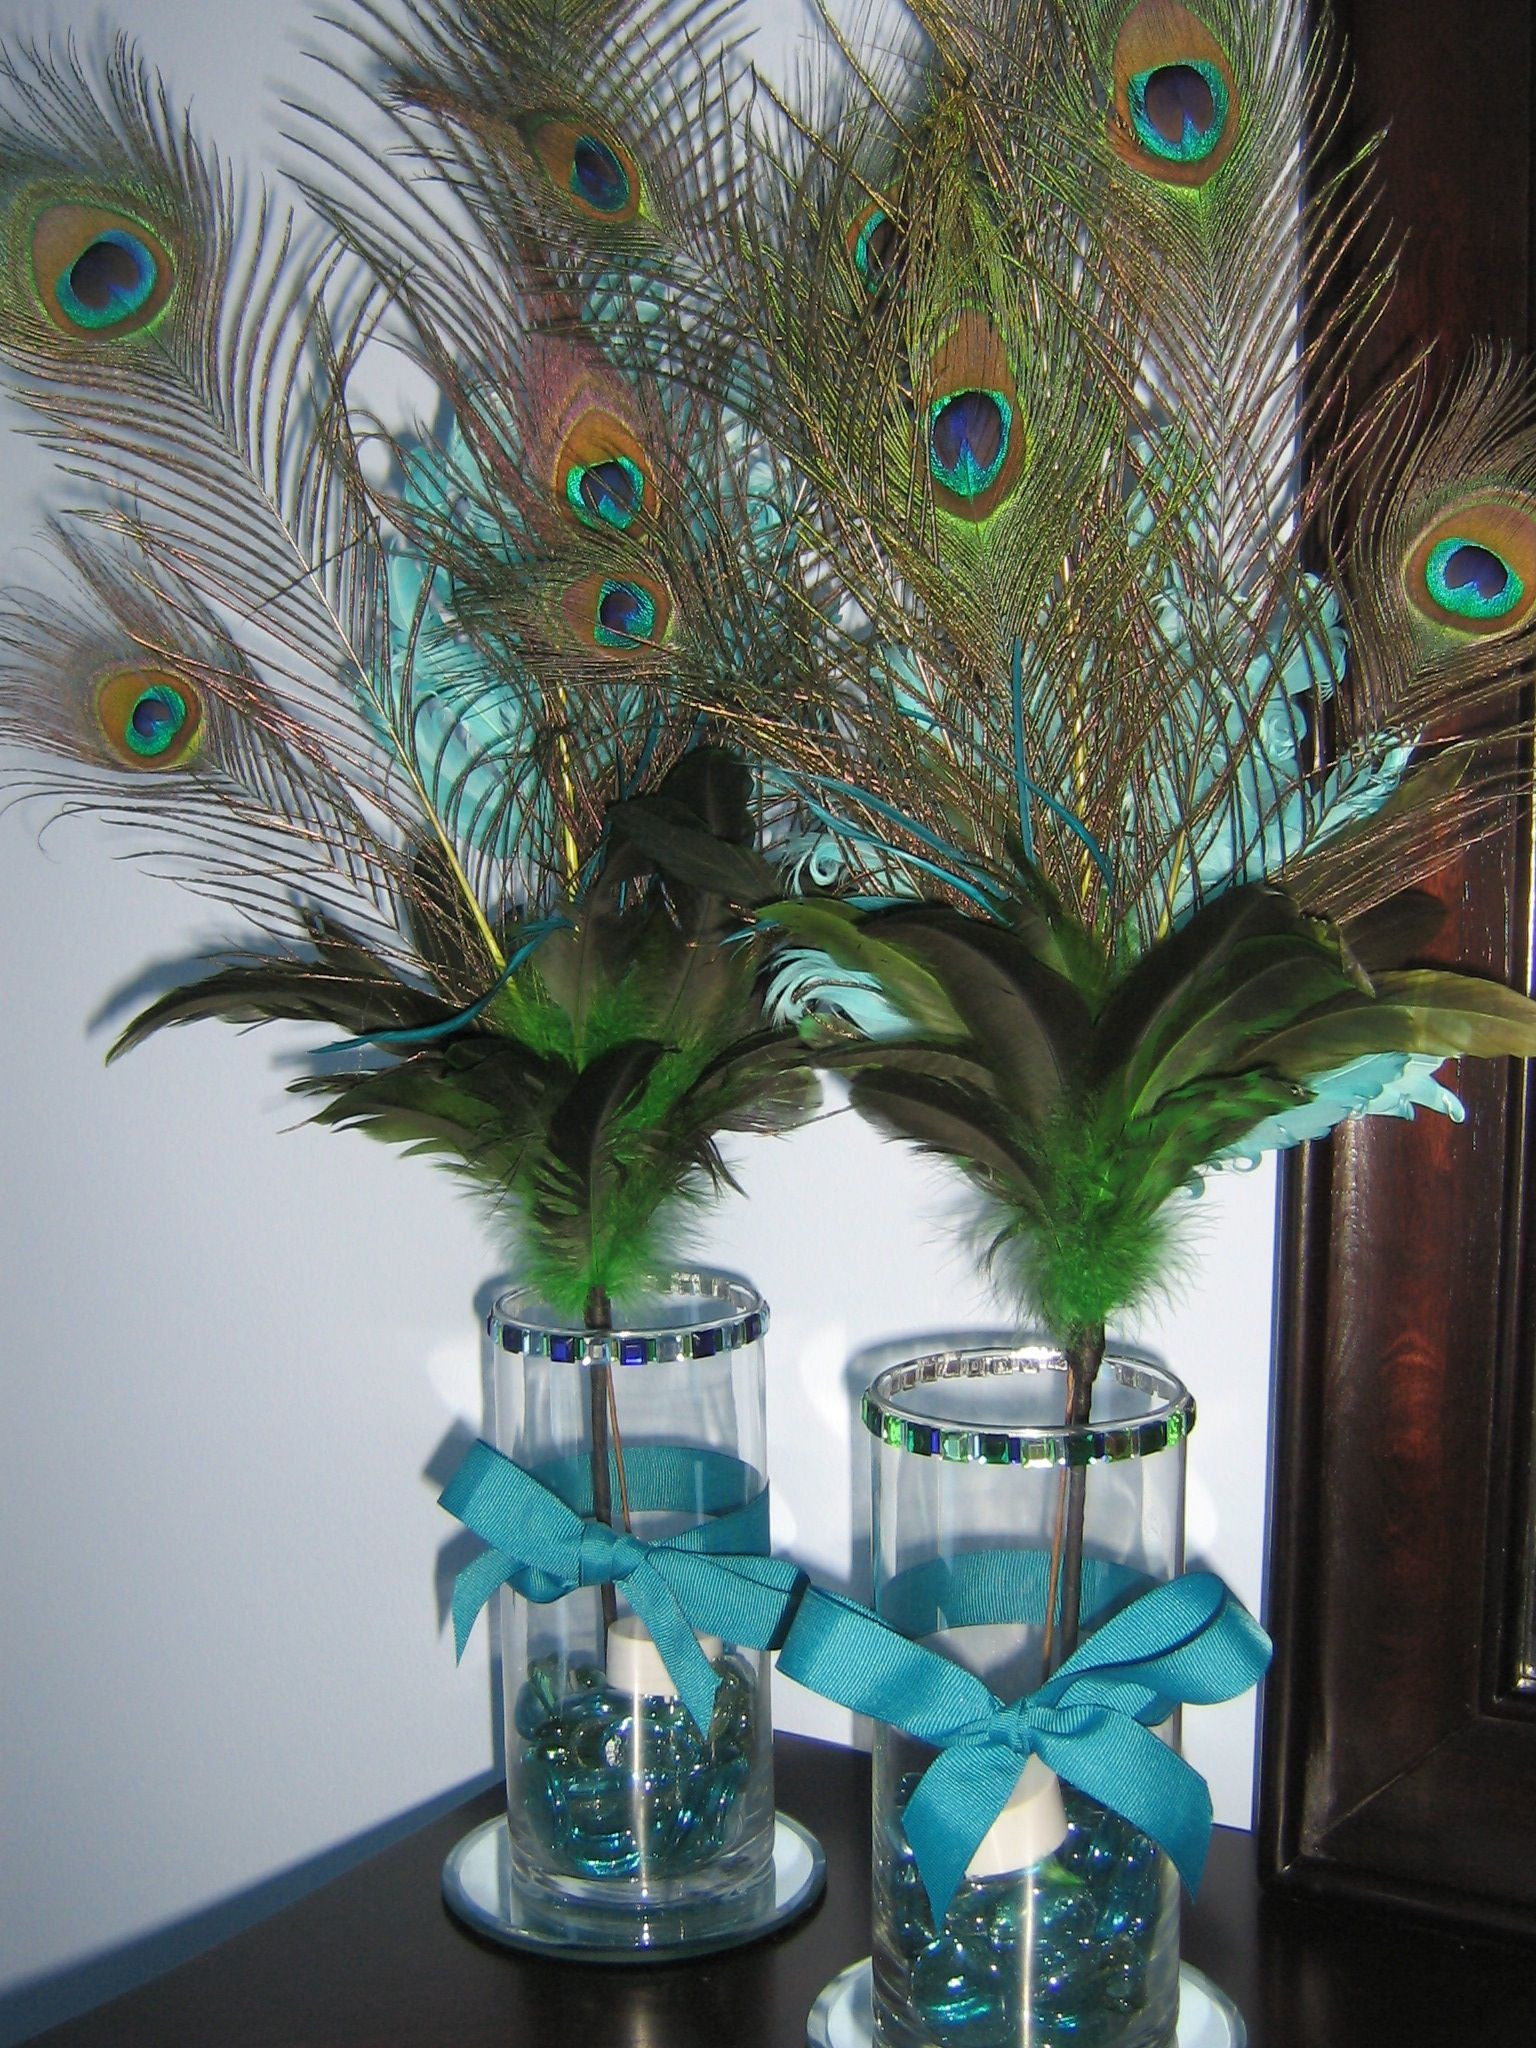 DIY Peacock Party Decorations
 DIY Peacock Feather Centerpieces For a pretty glow add